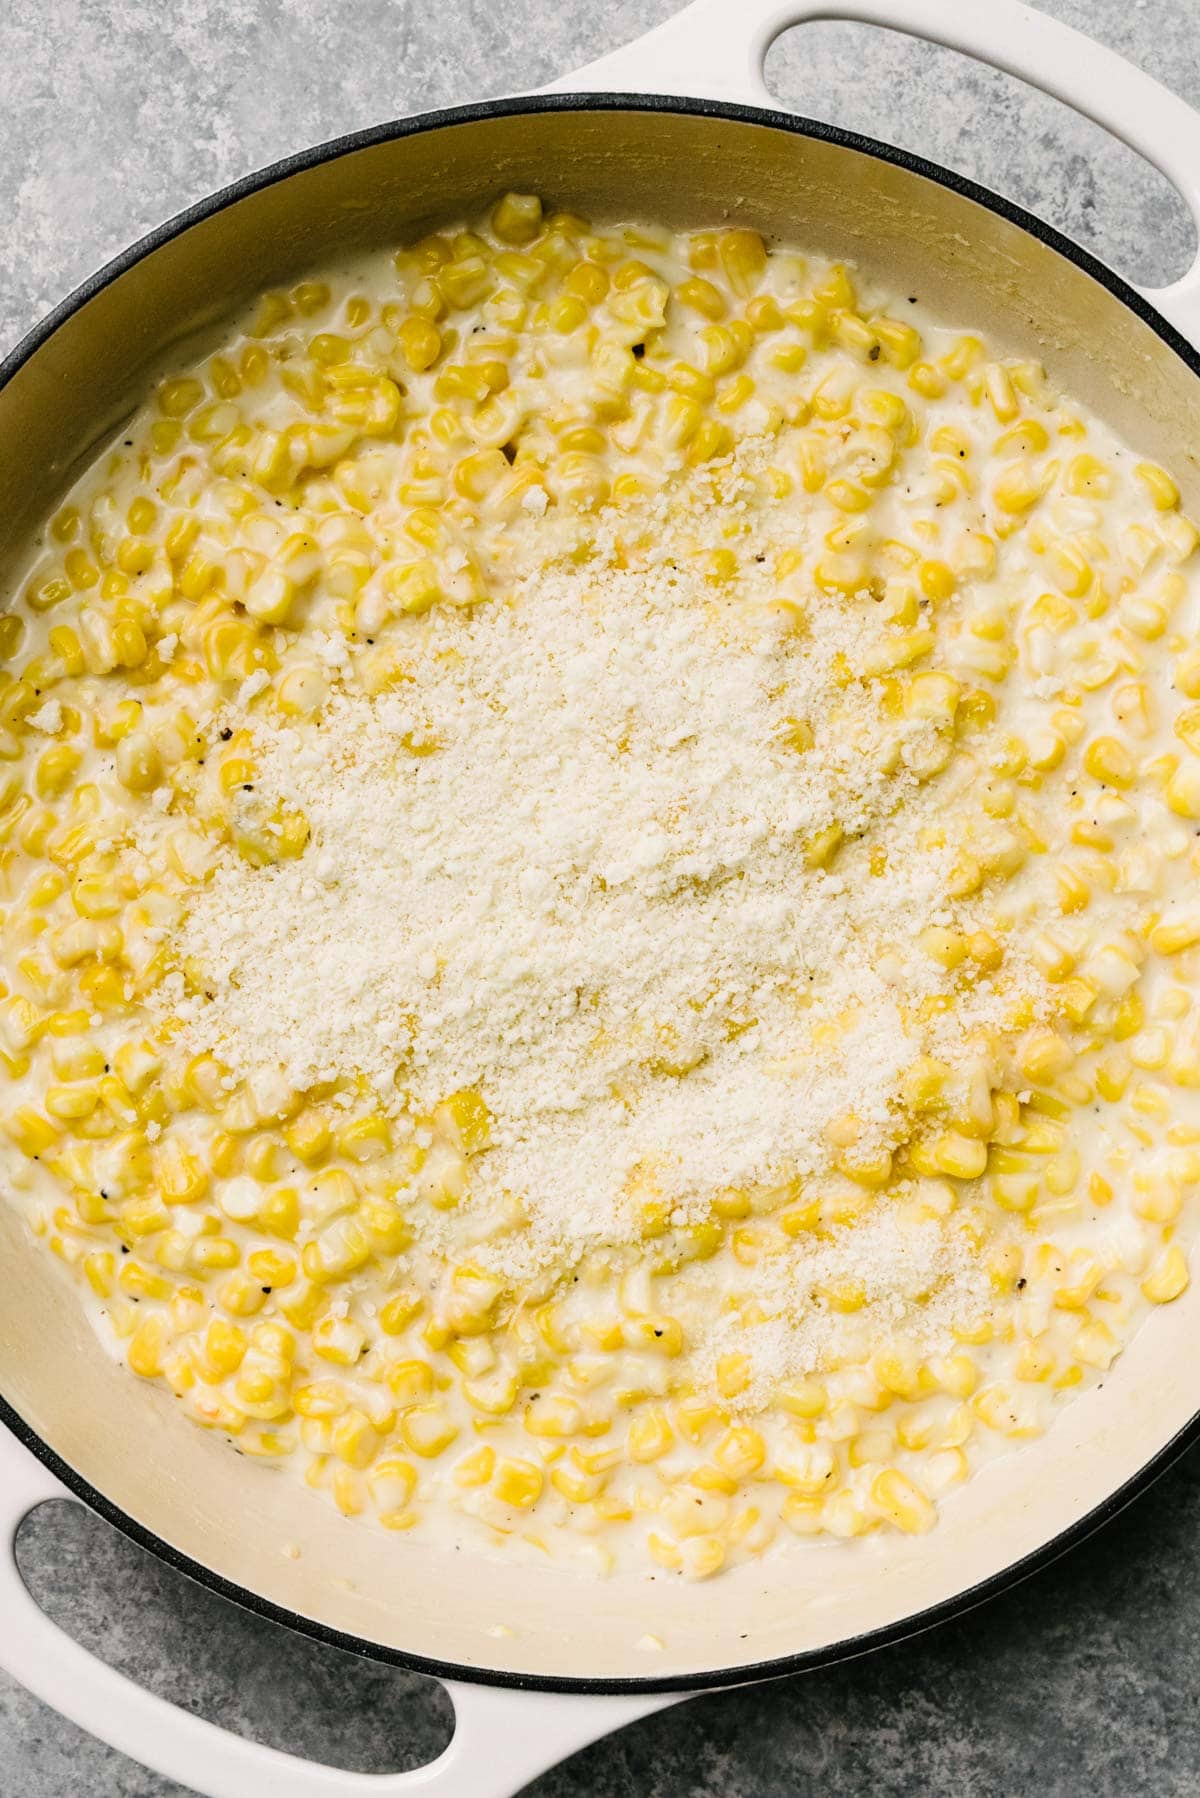 Grated parmesan cheese sprinkled over homemade cream style corn in a large grey skillet.